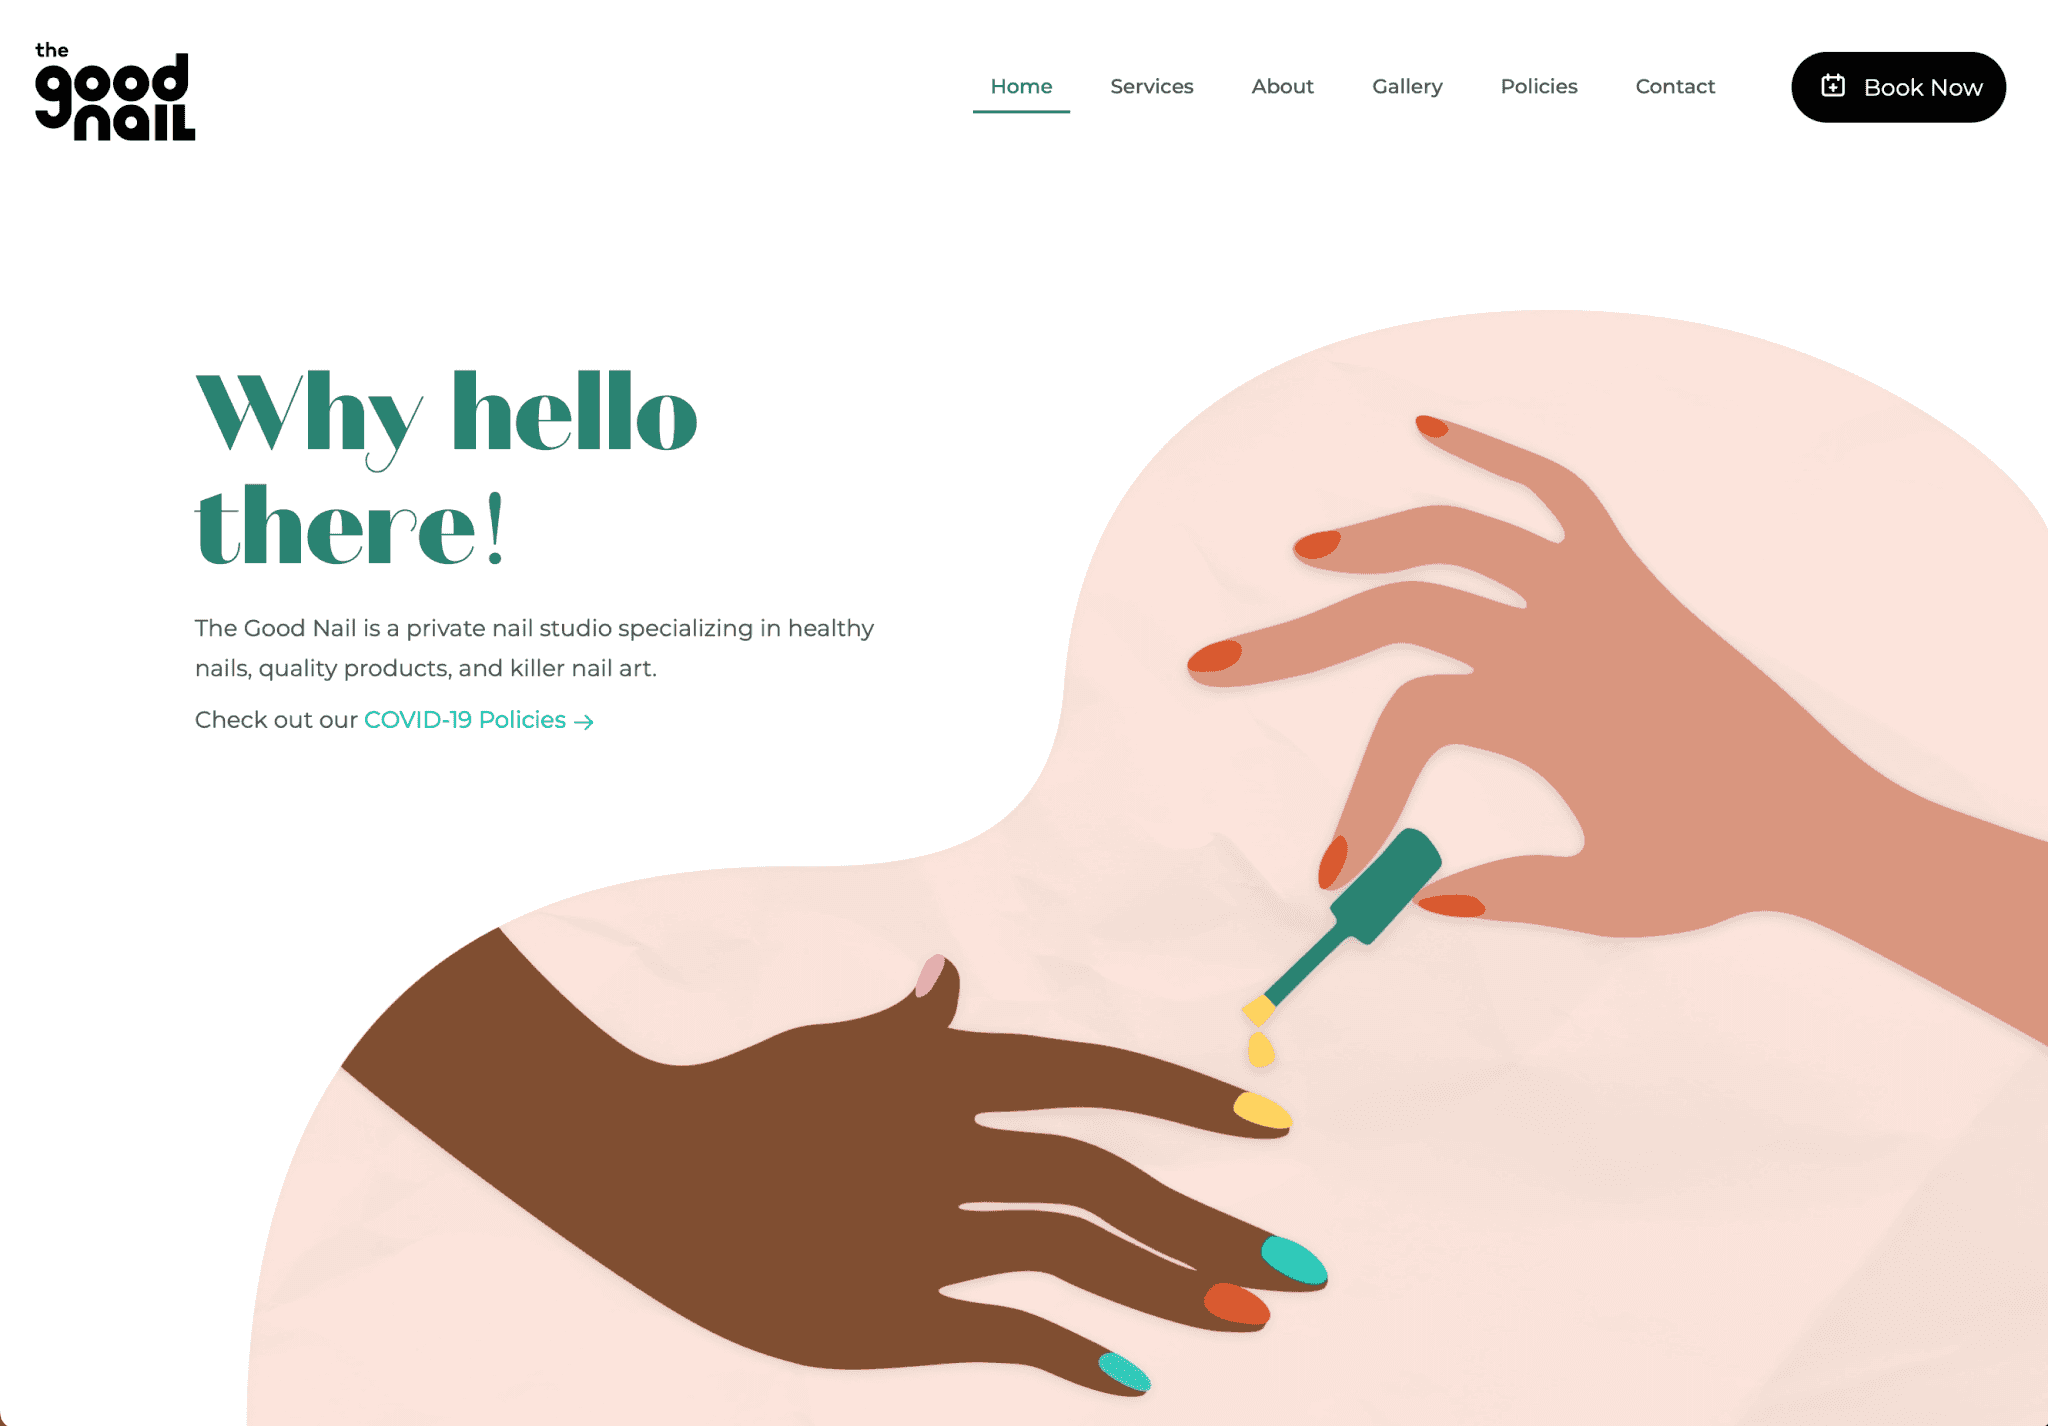 The Good Nail website